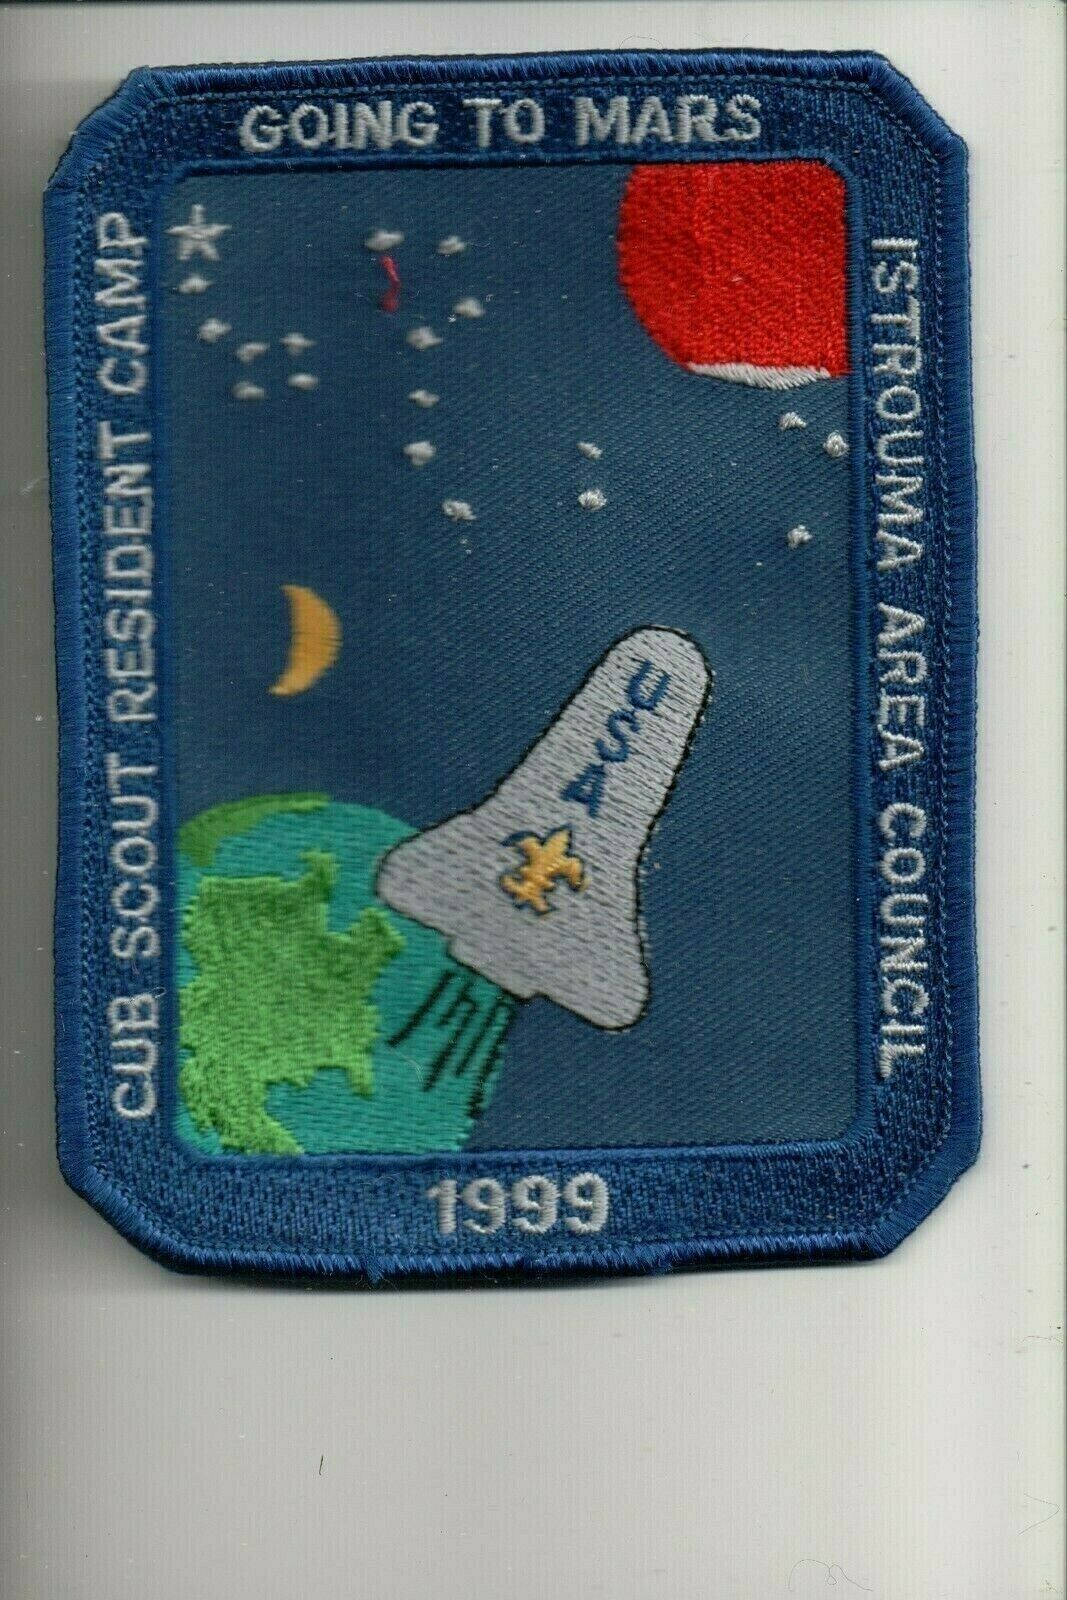 1999 Istrouma Area Council Cub Scout Resident Camp Going To Mars patch